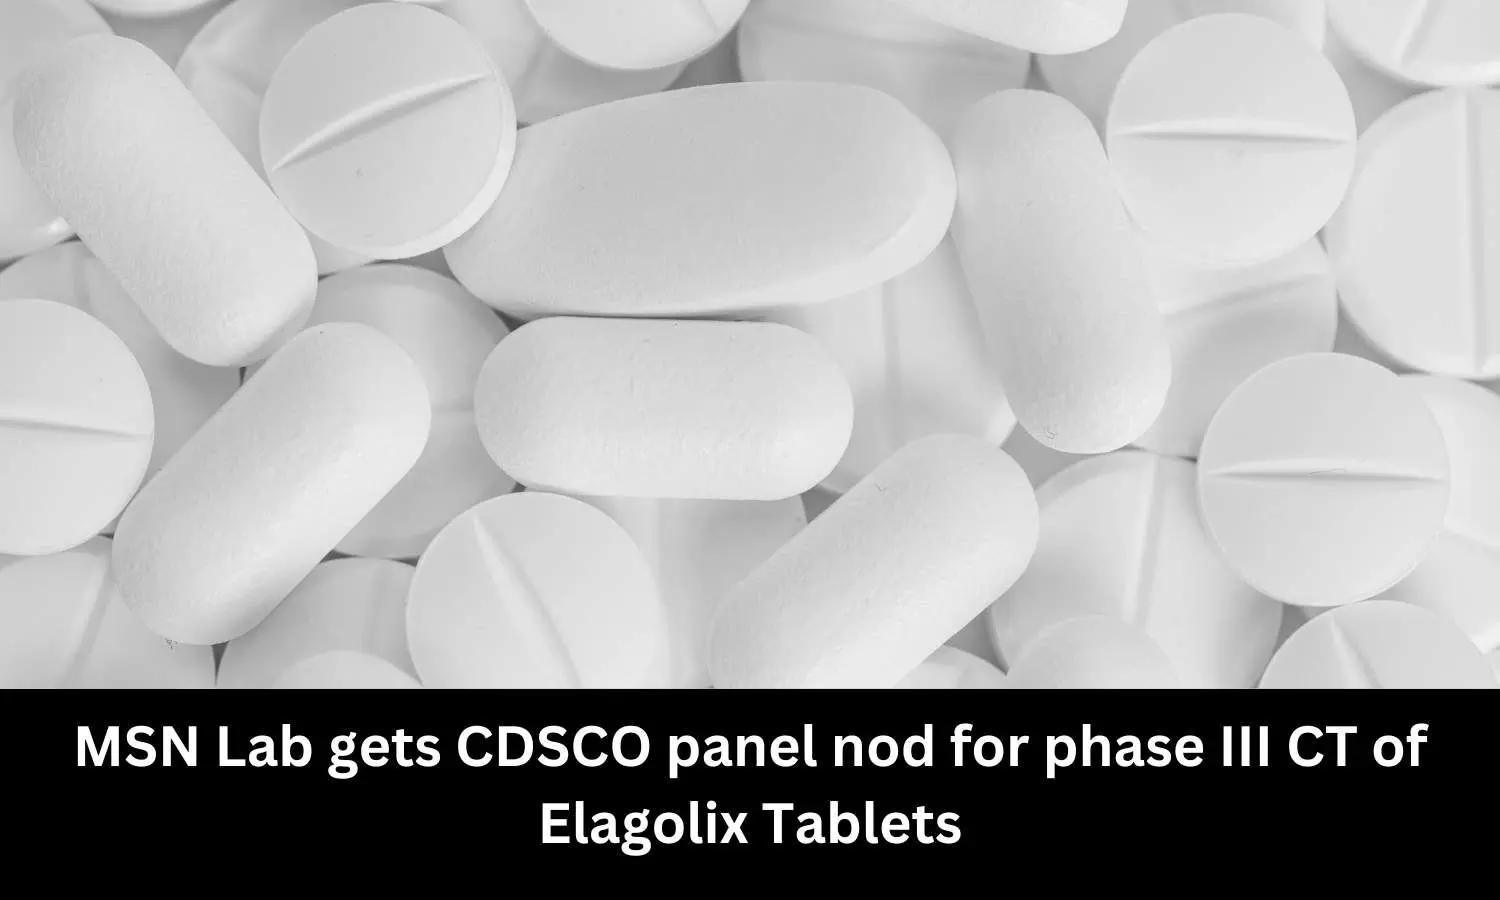 CDSCO panel nod to MSN Labs to conduct phase III CT of Elagolix Tablets